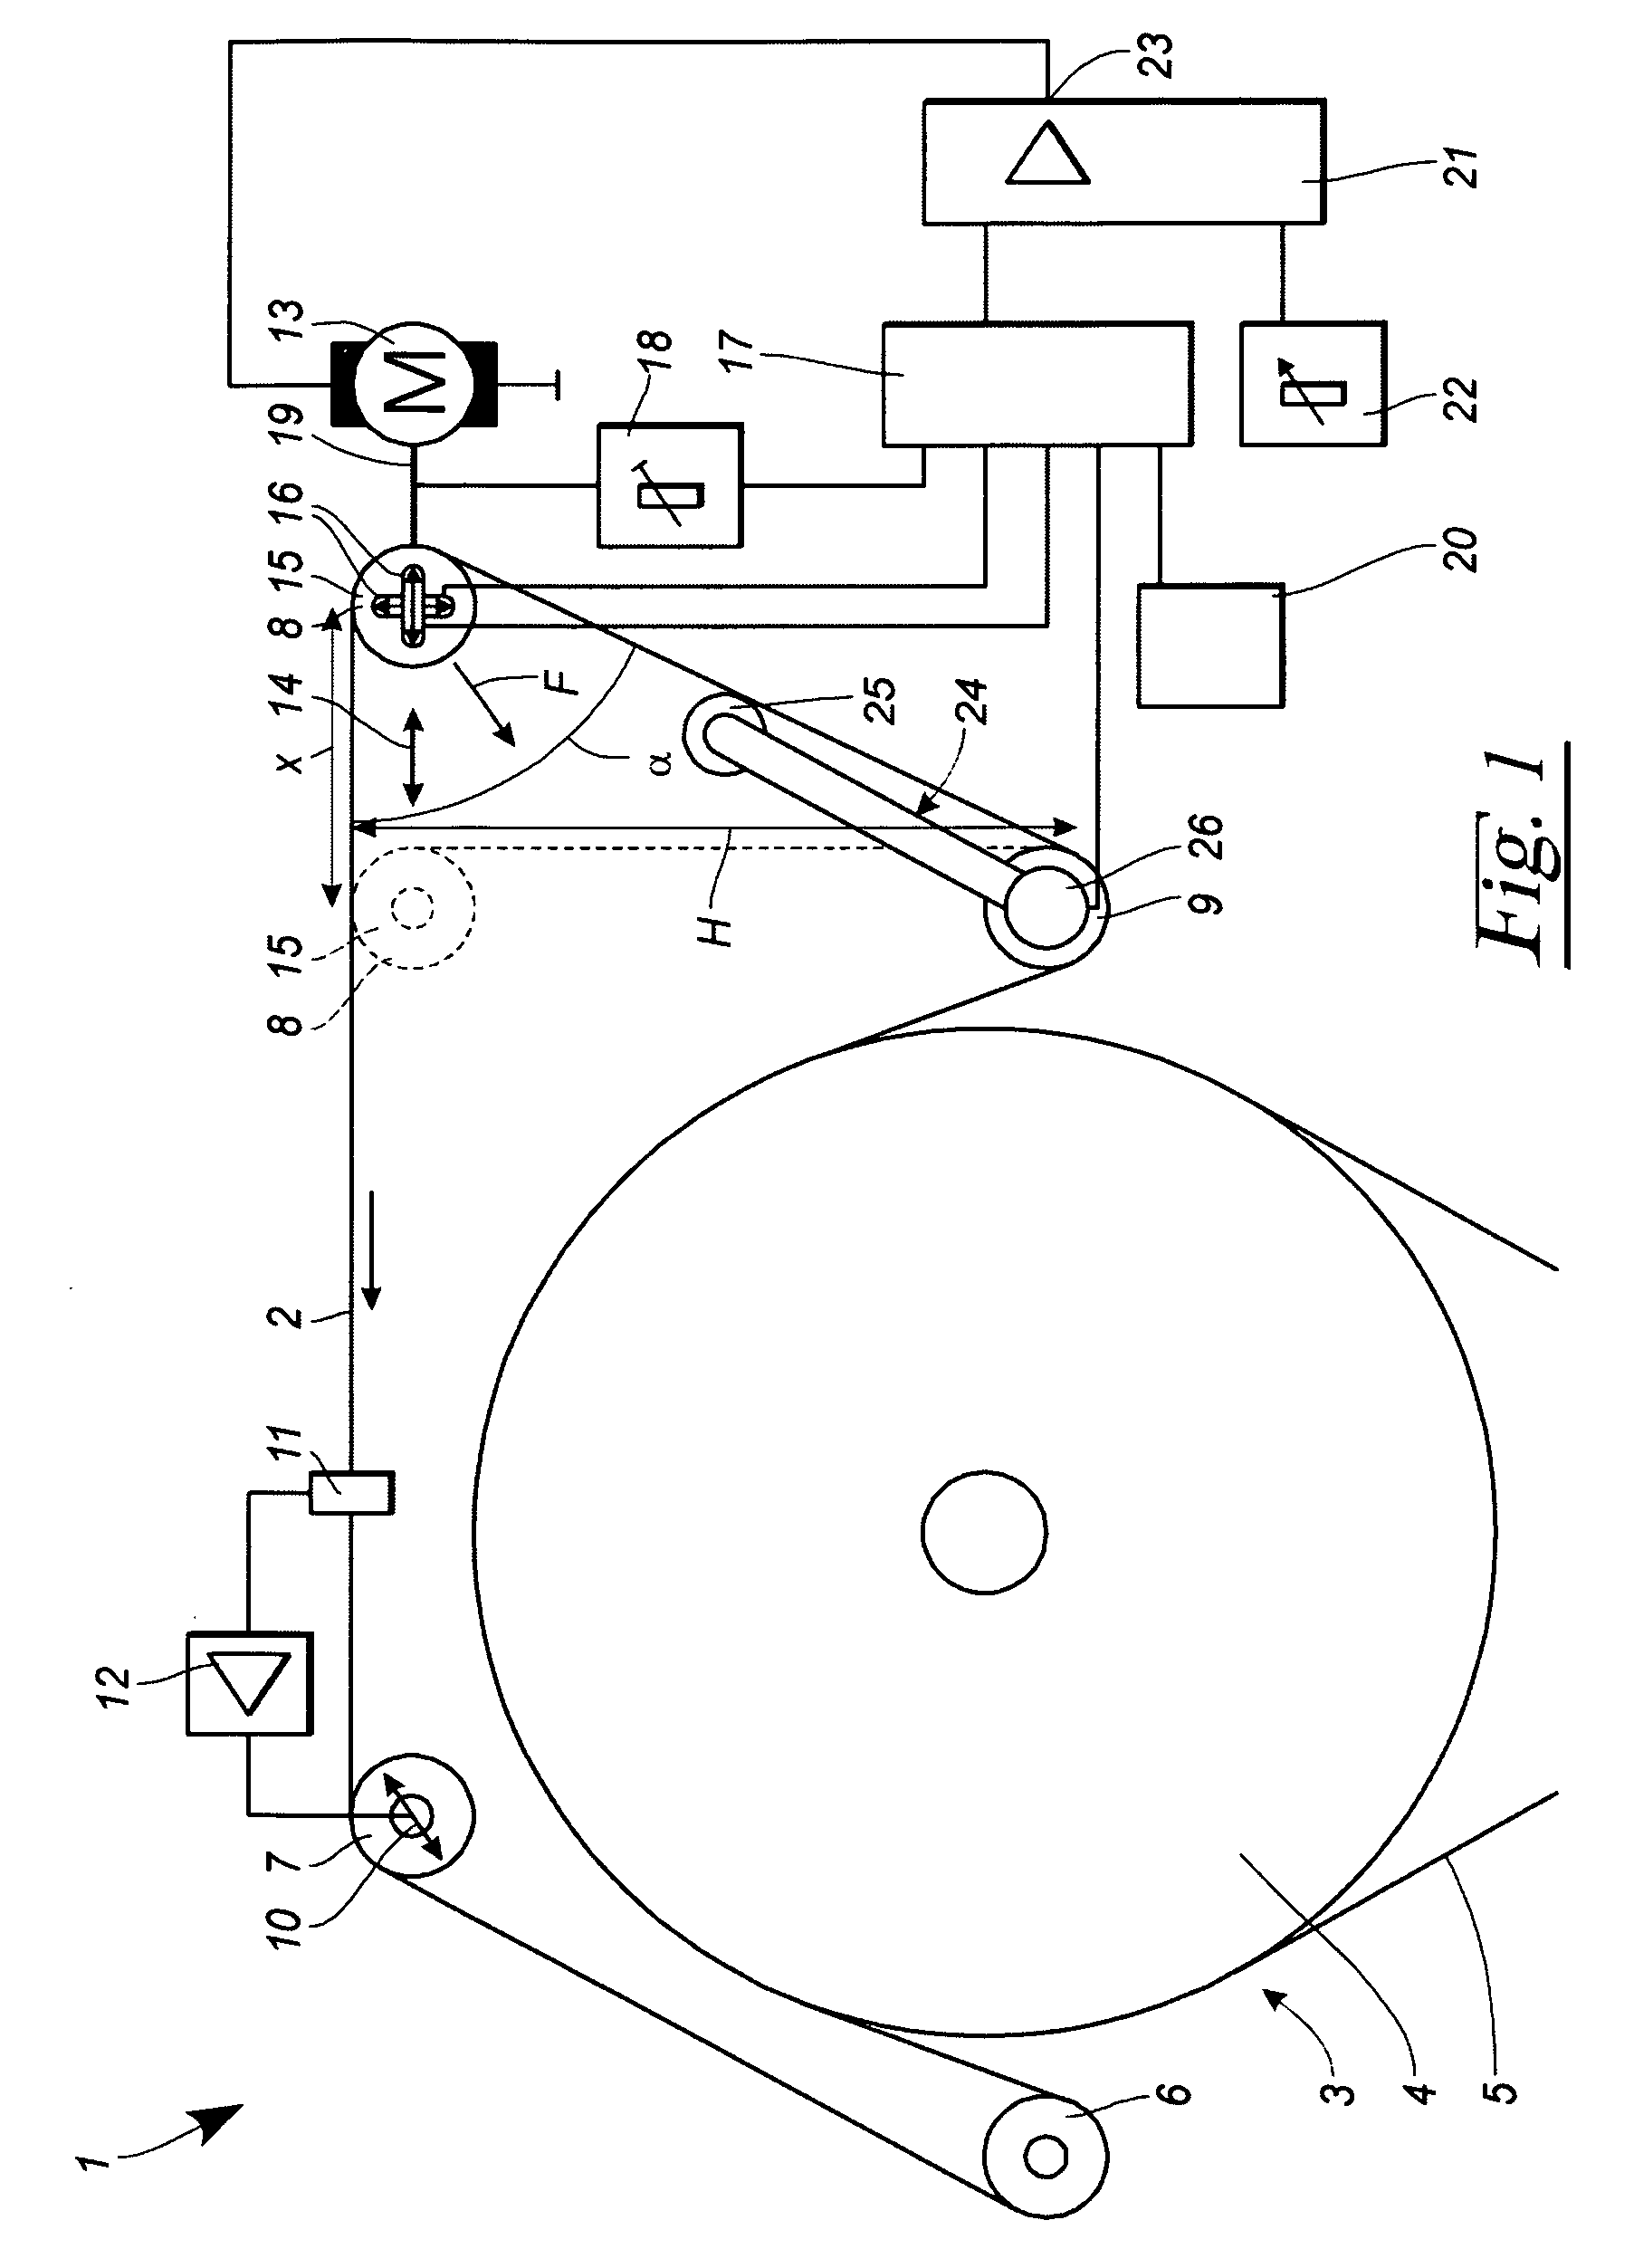 Device and method for regulating the tension of a running web